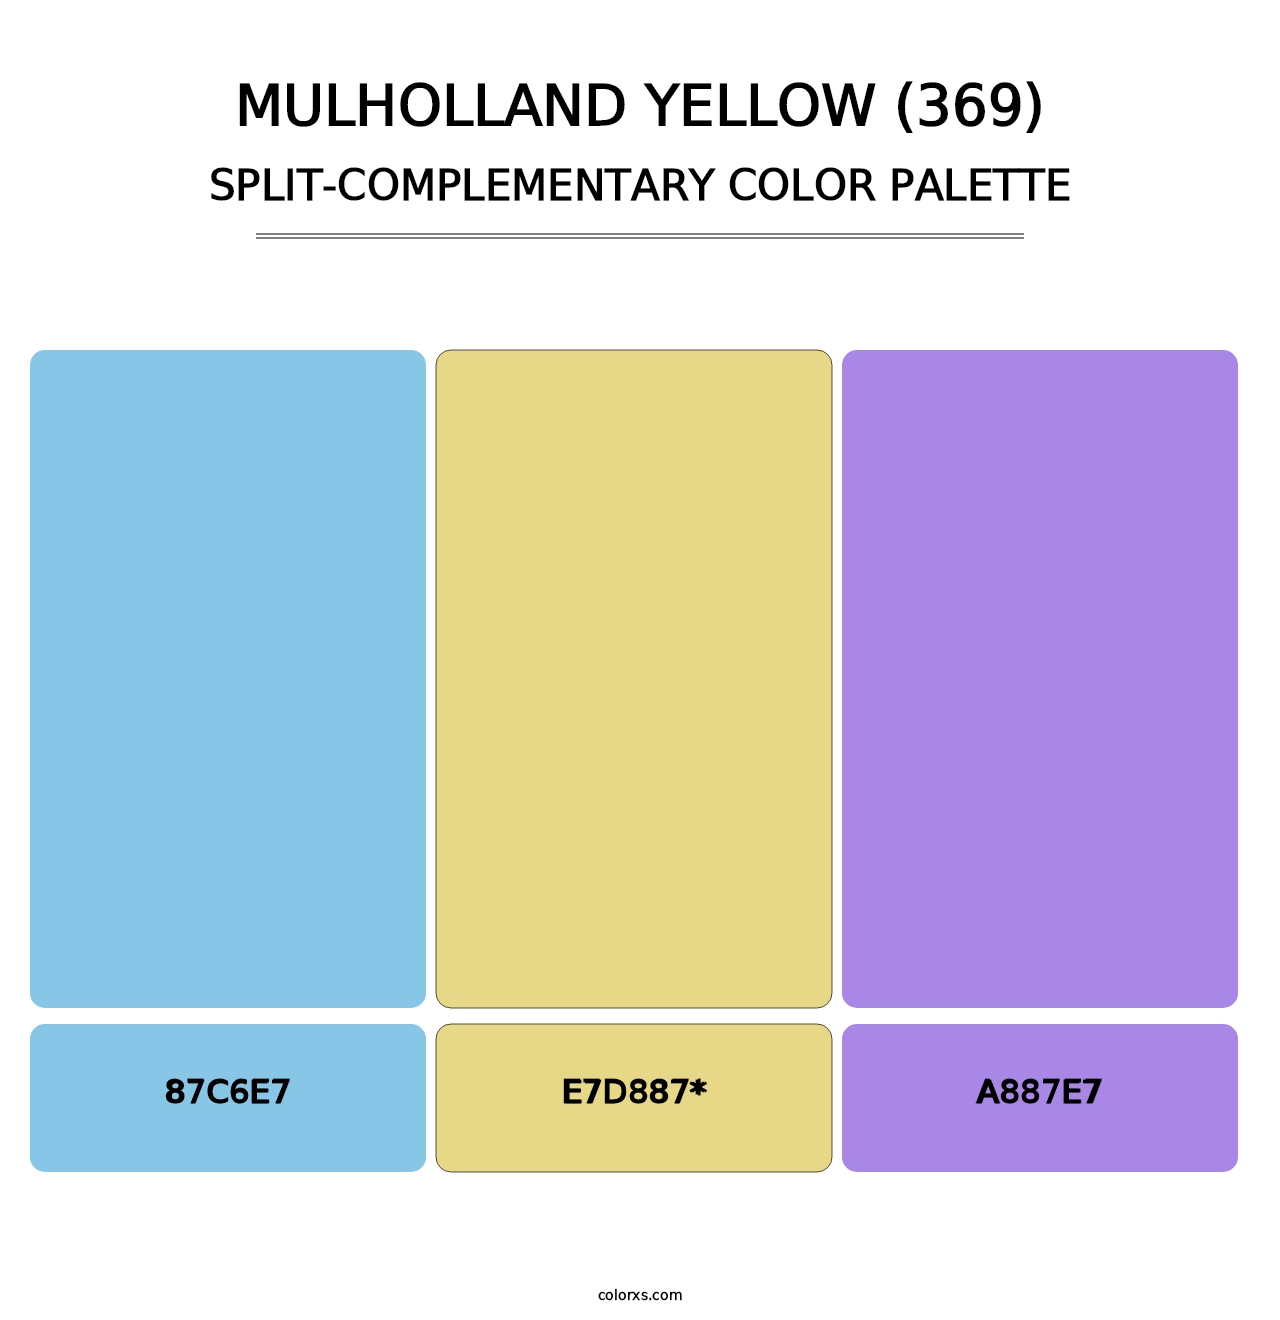 Mulholland Yellow (369) - Split-Complementary Color Palette